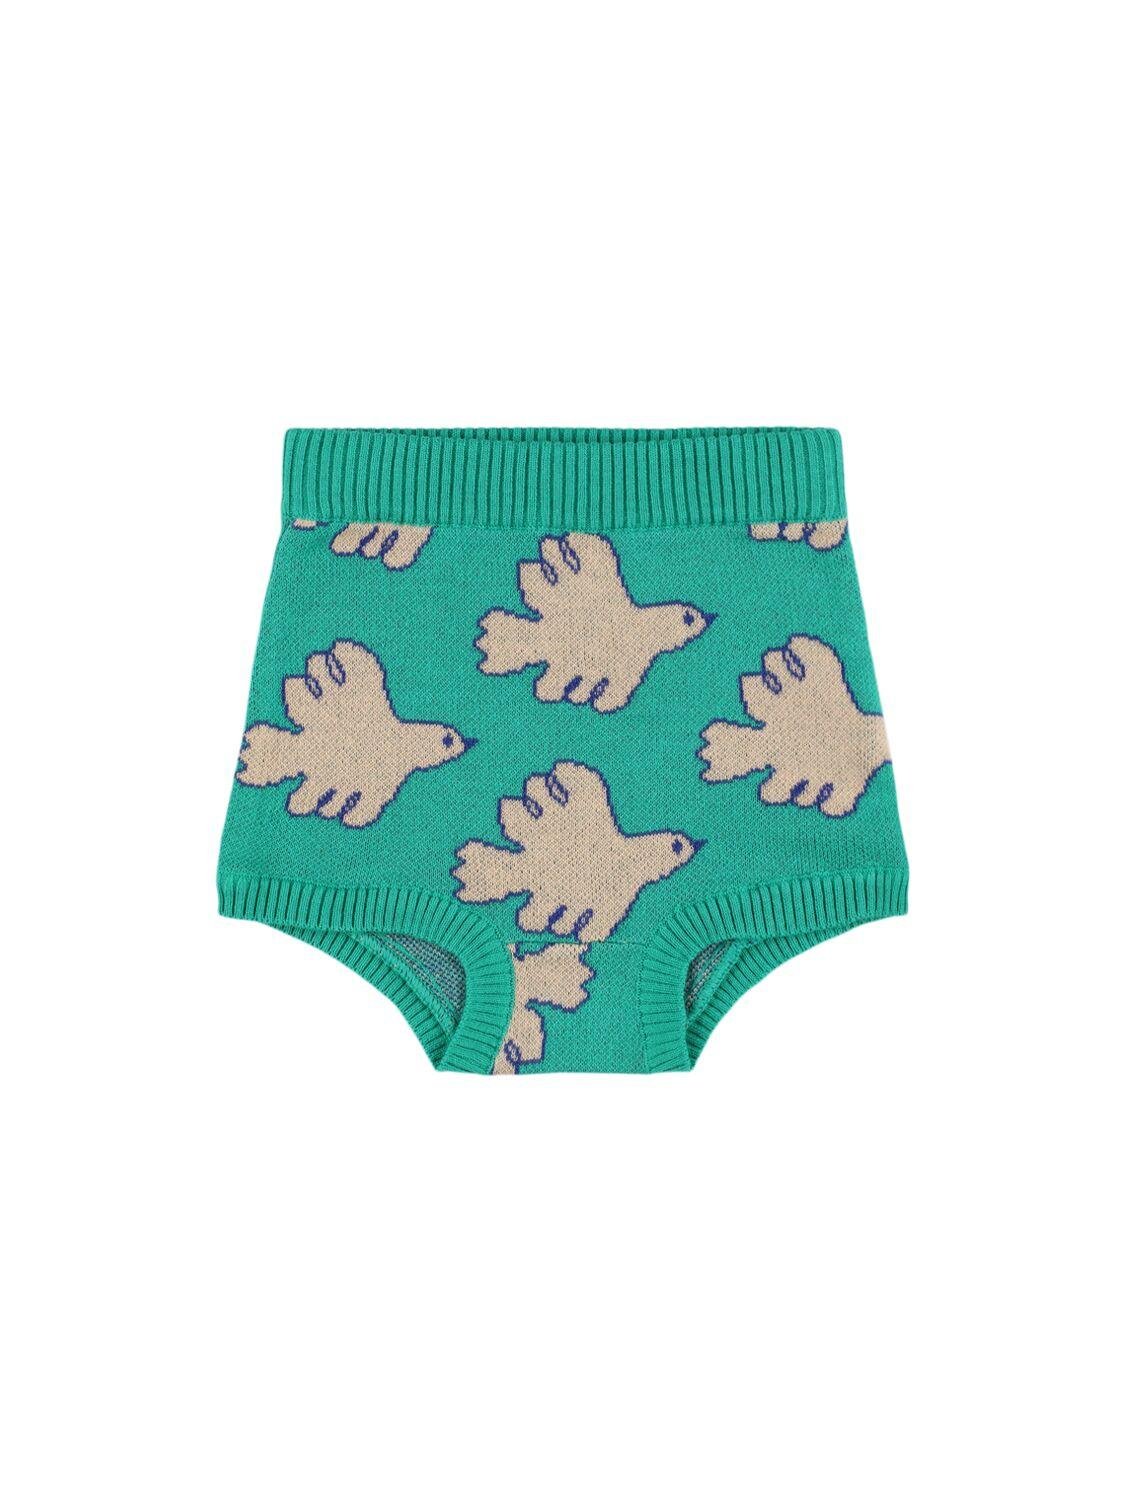 Intarsia Doves Cotton Knit Diaper Cover by TINY COTTONS